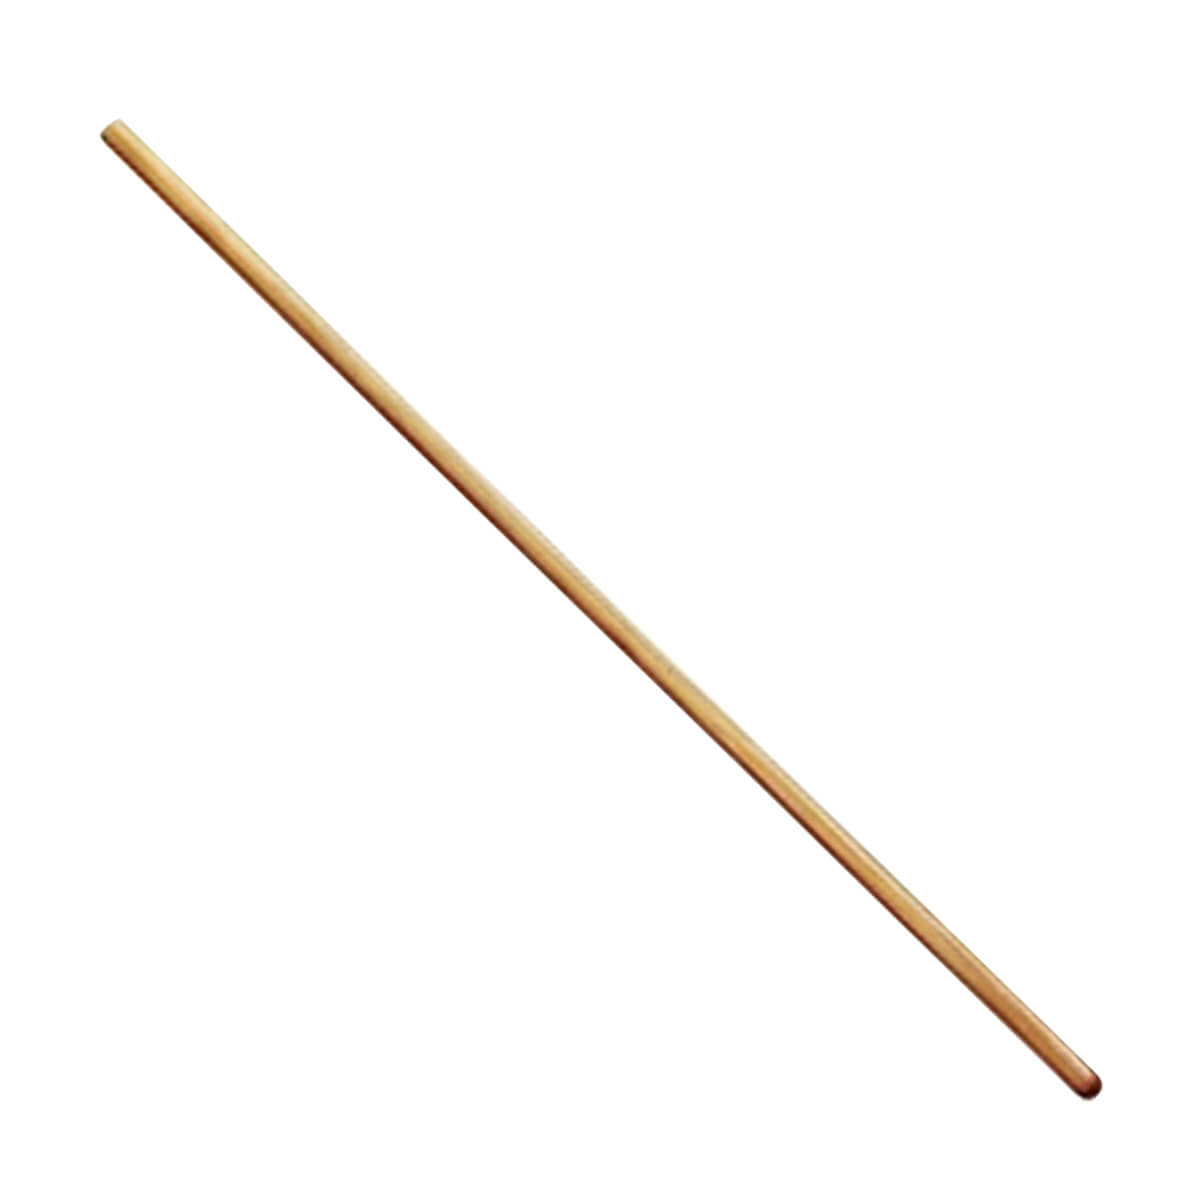 Threaded Wooden Pole - 54-in